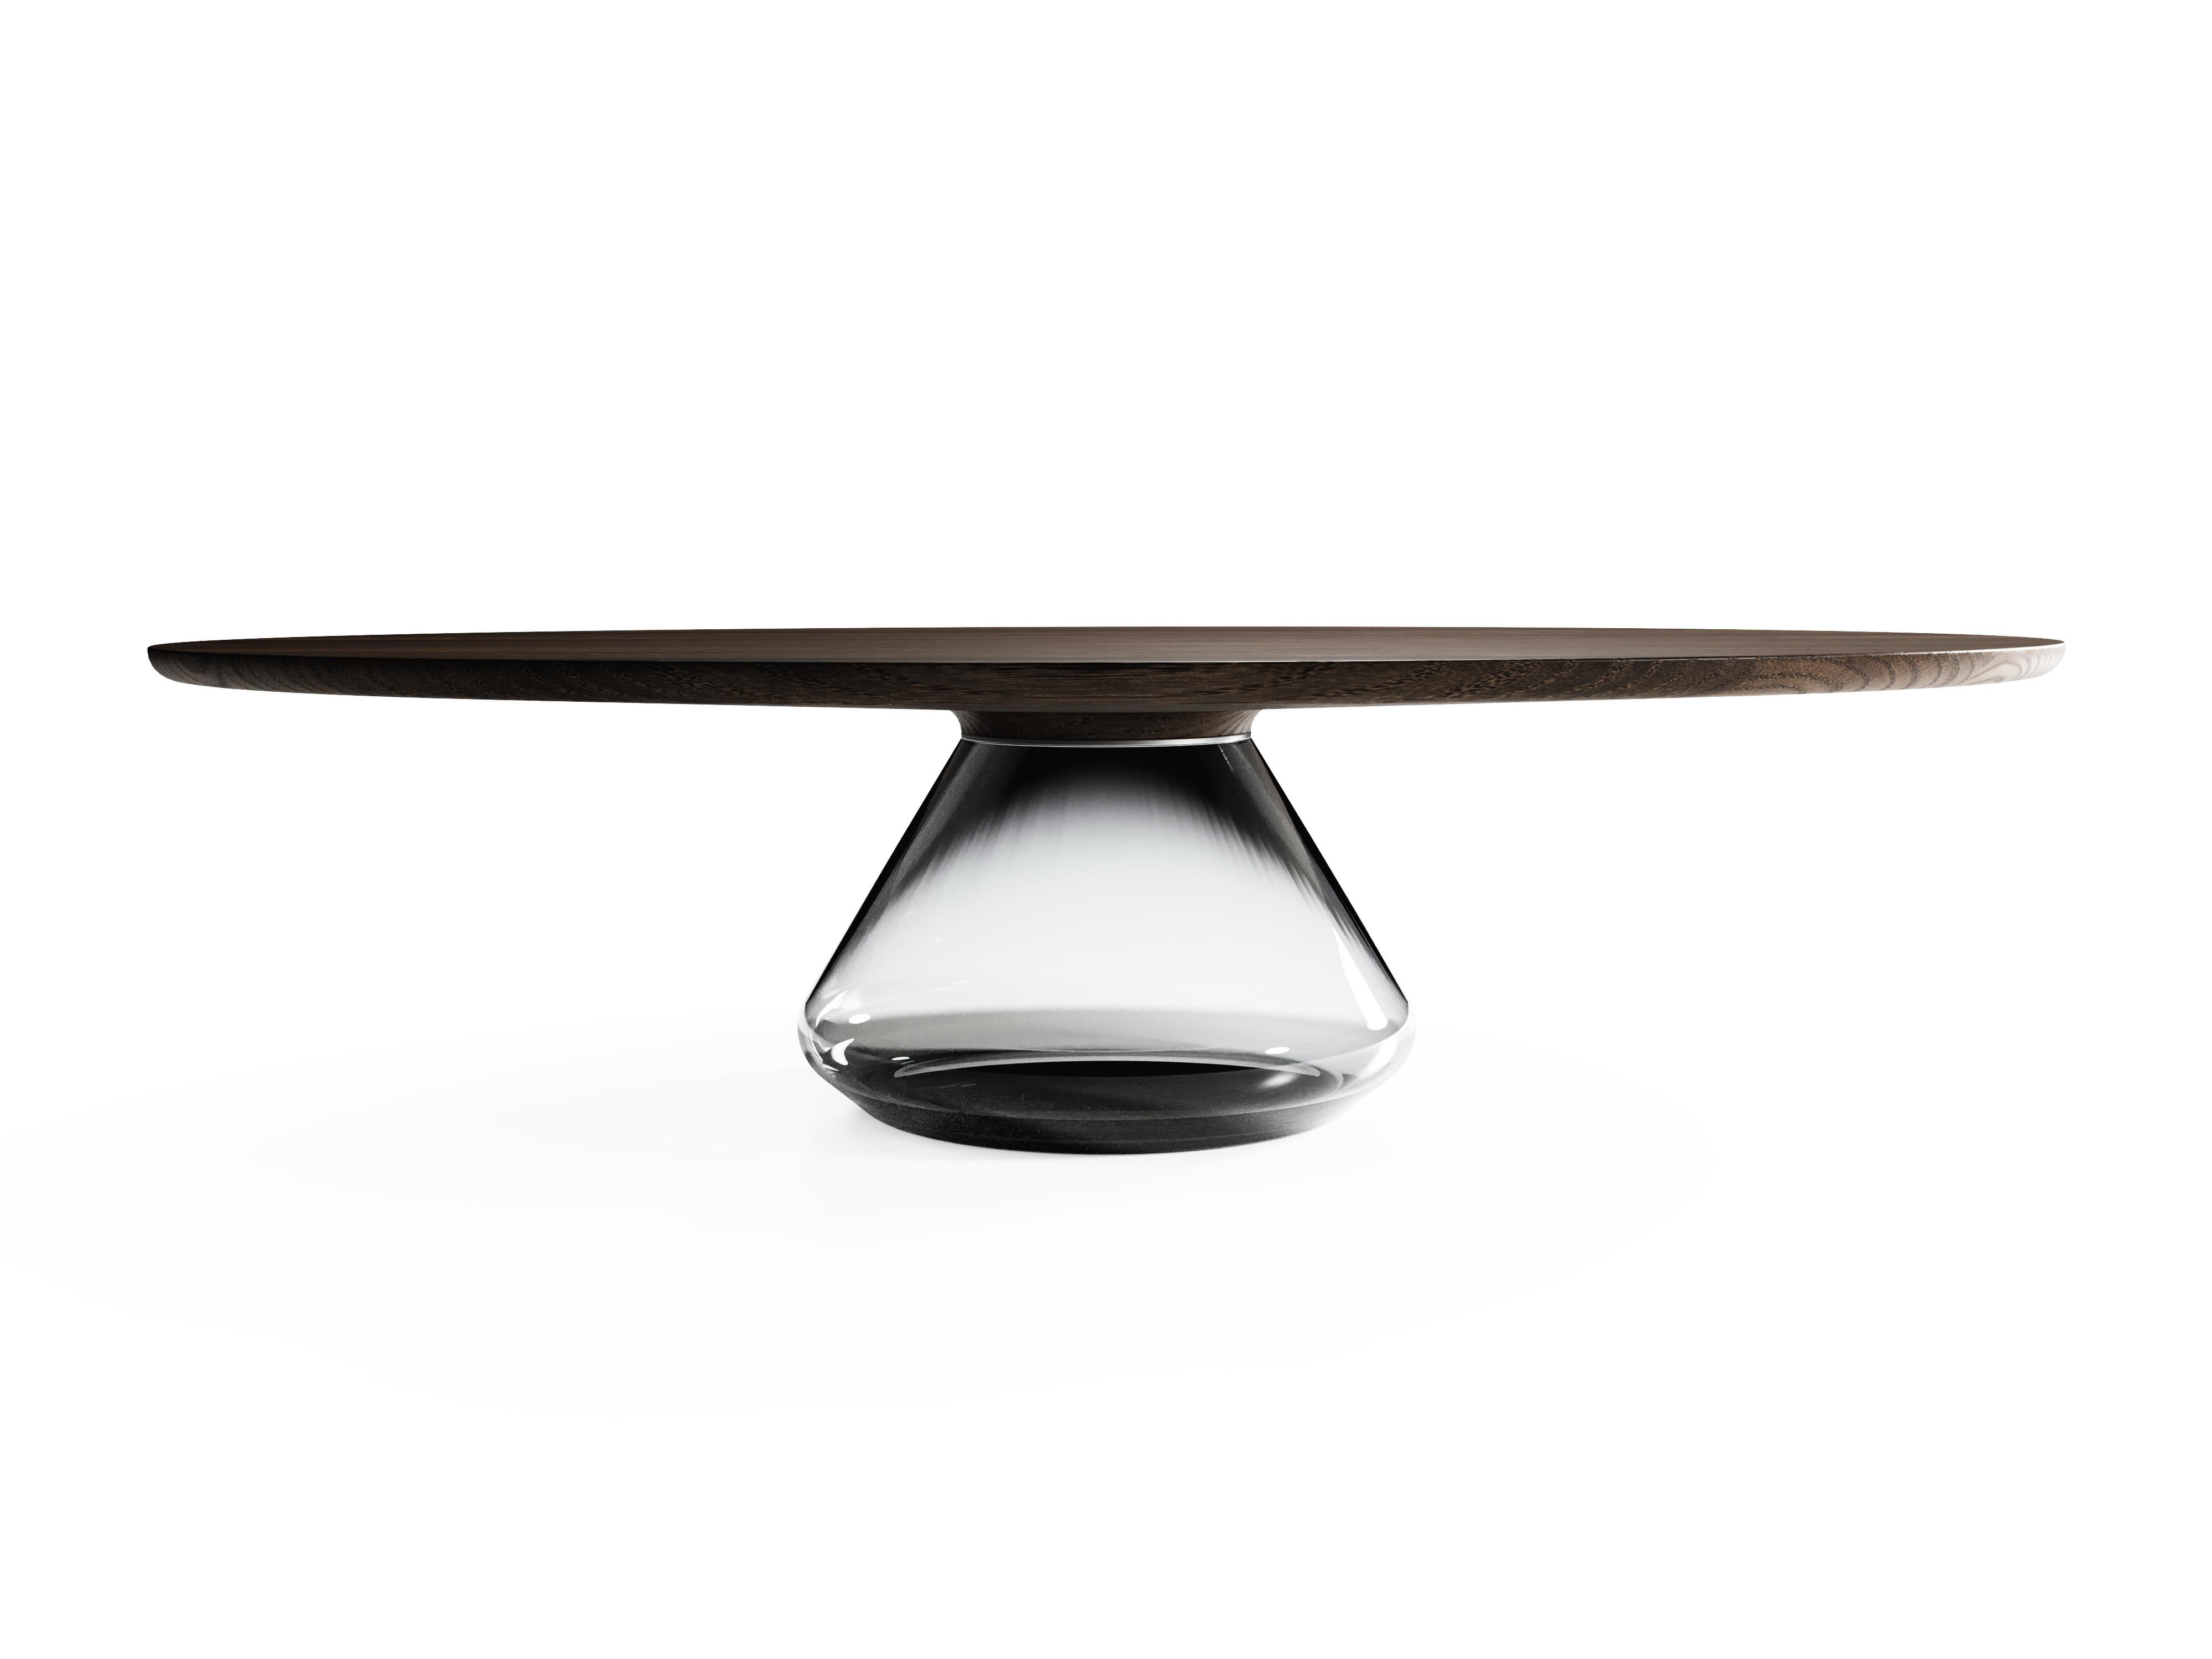 The Smoky Eclipse I, limited edition coffee table by Grzegorz Majka
Limited Edition of 8
Dimensions: 54 x 48 x 14 in
Materials: Glass, oak

The total eclipse of every interior? With this amazing table everything is possible as with its Minimalist